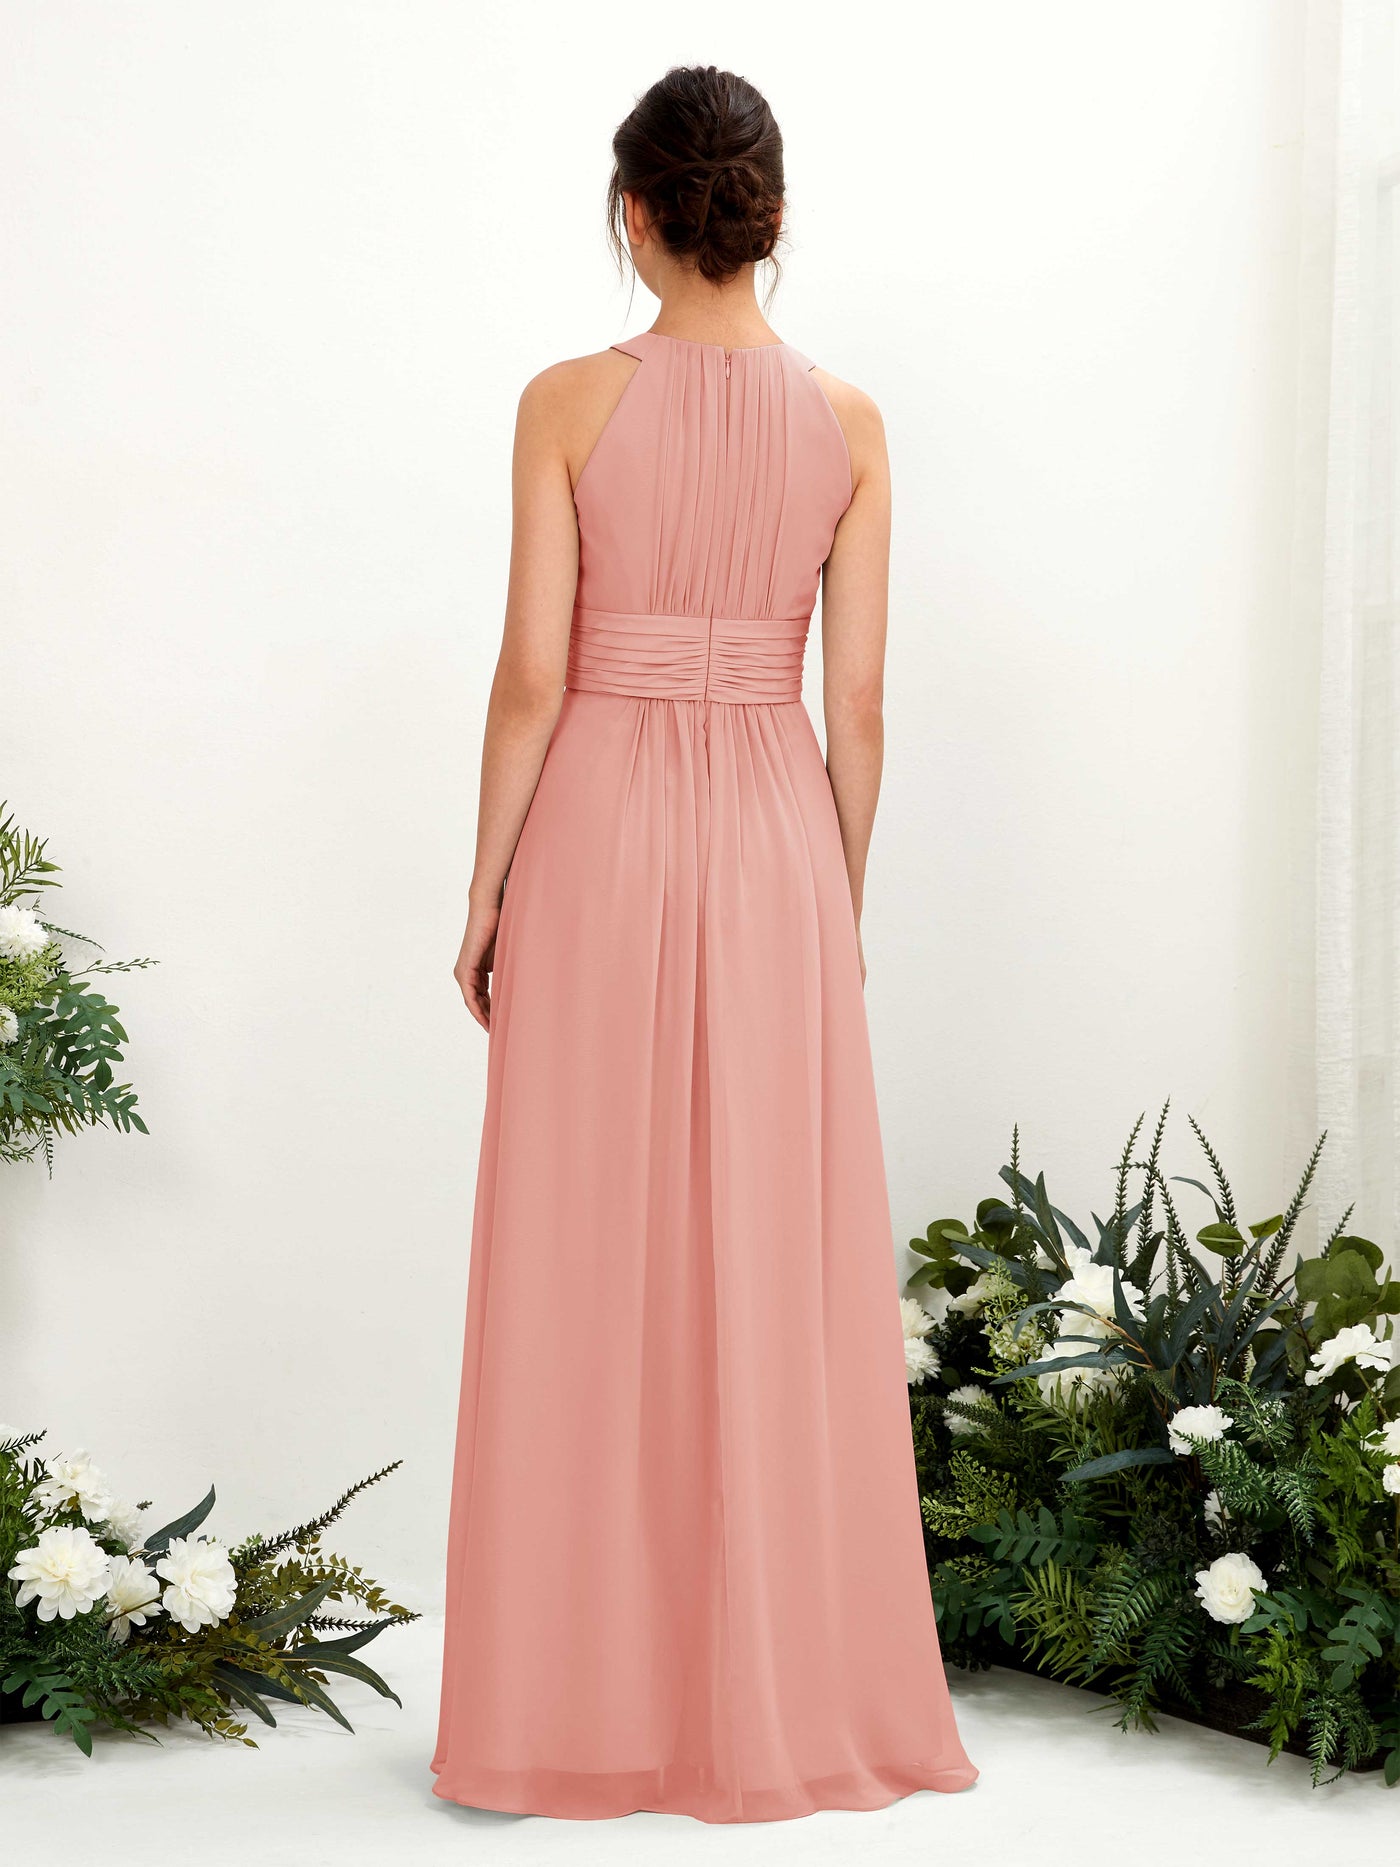 Champagne Rose Bridesmaid Dresses Bridesmaid Dress A-line Chiffon Halter Full Length Sleeveless Wedding Party Dress (81221506)#color_champagne-rose